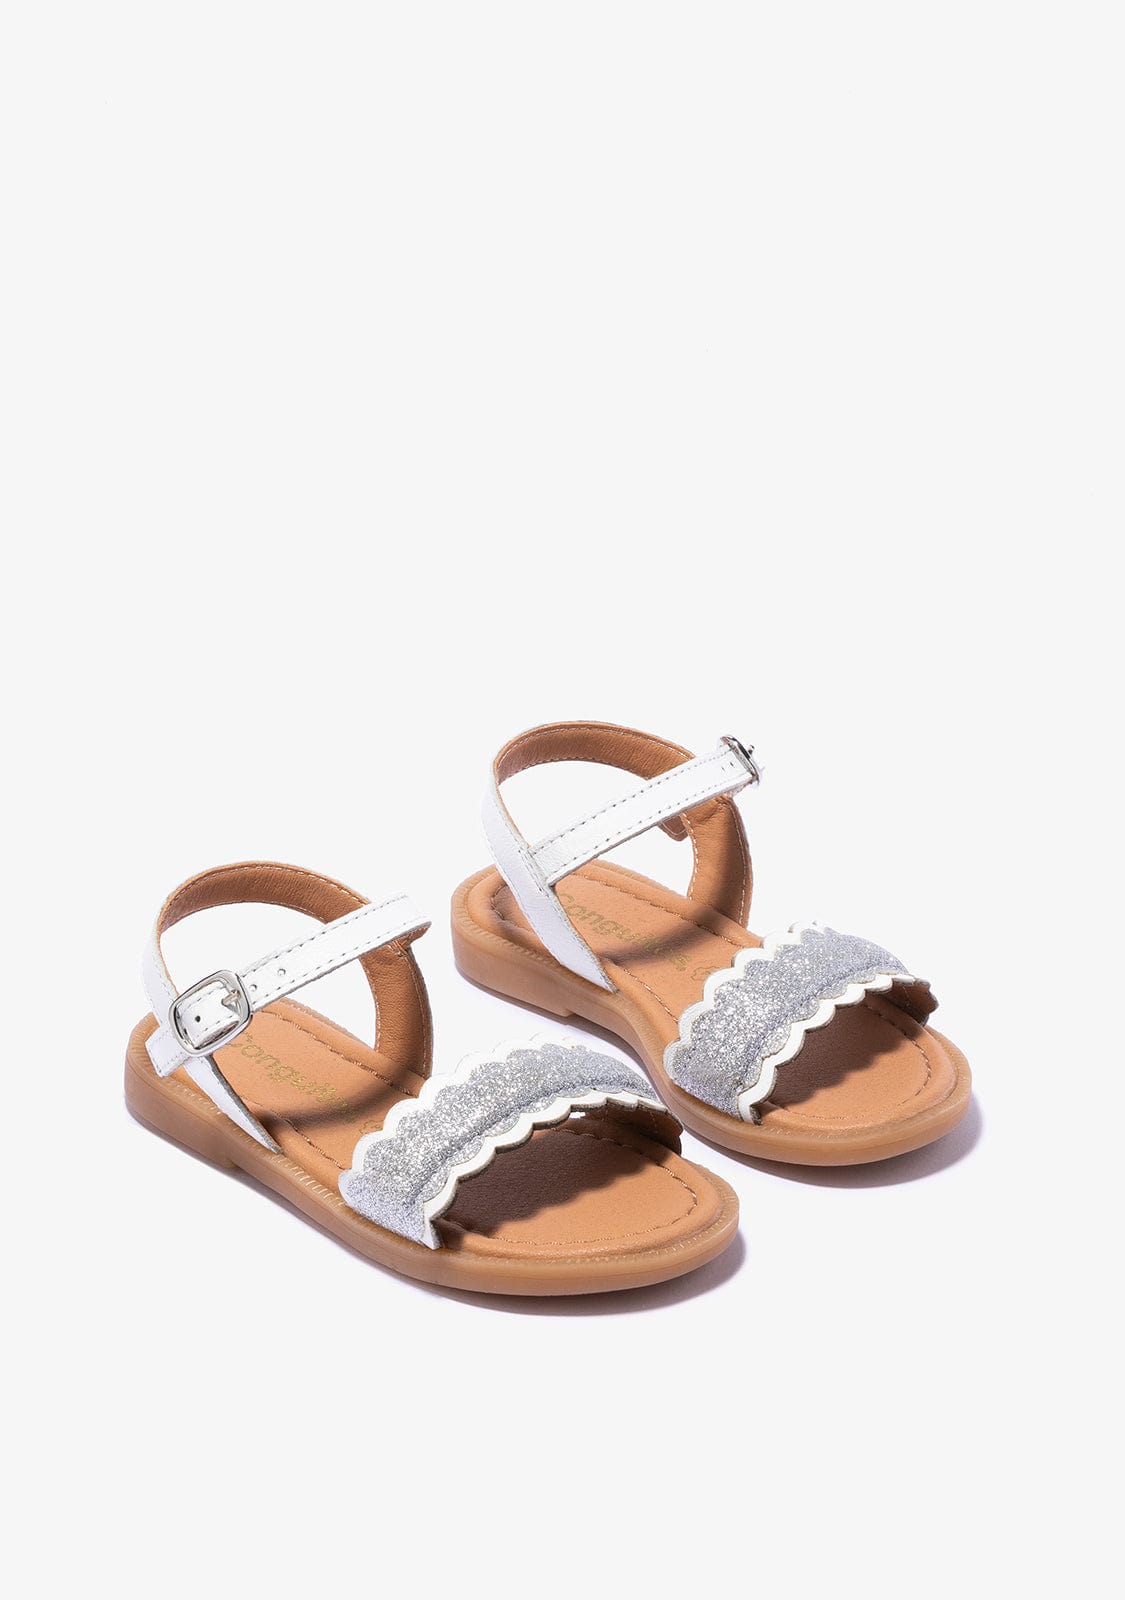 CONGUITOS Shoes Girl's White Buckle Sandals Napa